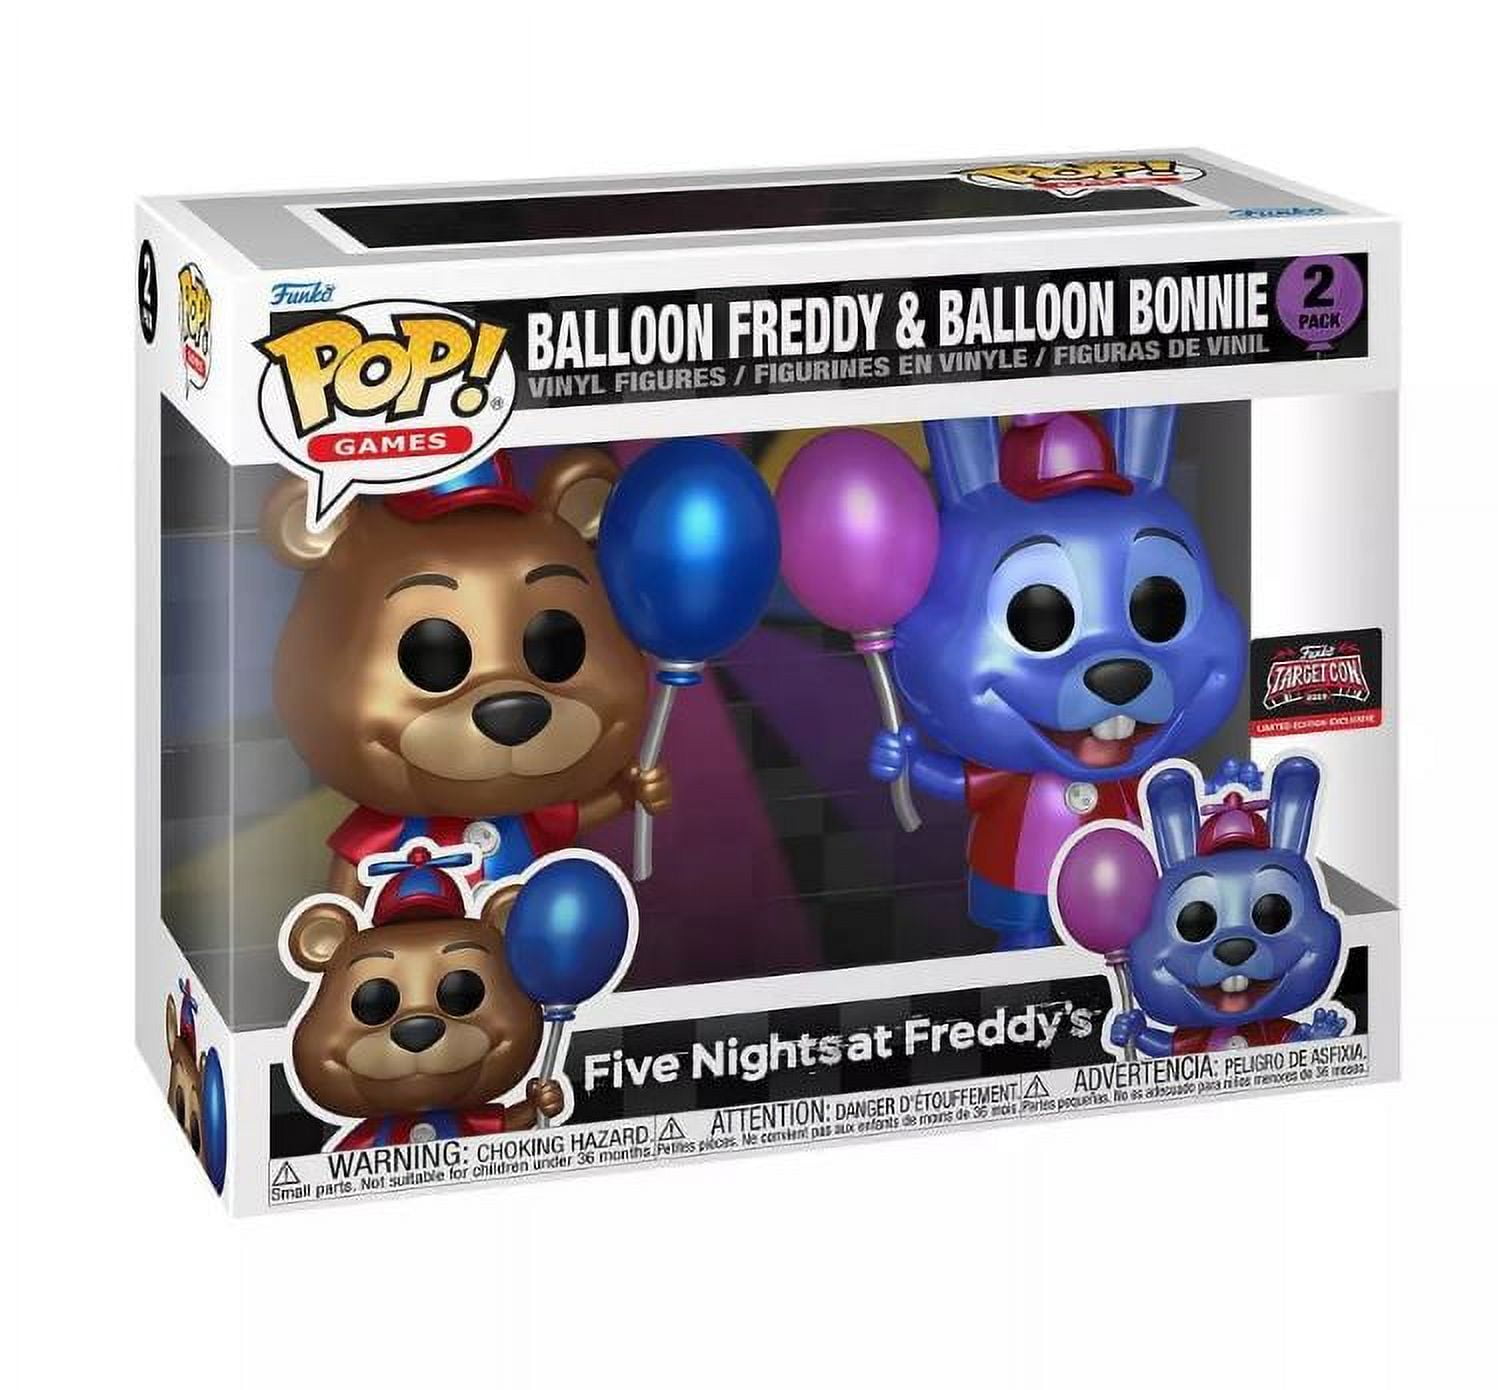  Funko Five Nights at Freddy's 4 Figure Pack(1 Set), 2 : Toys &  Games